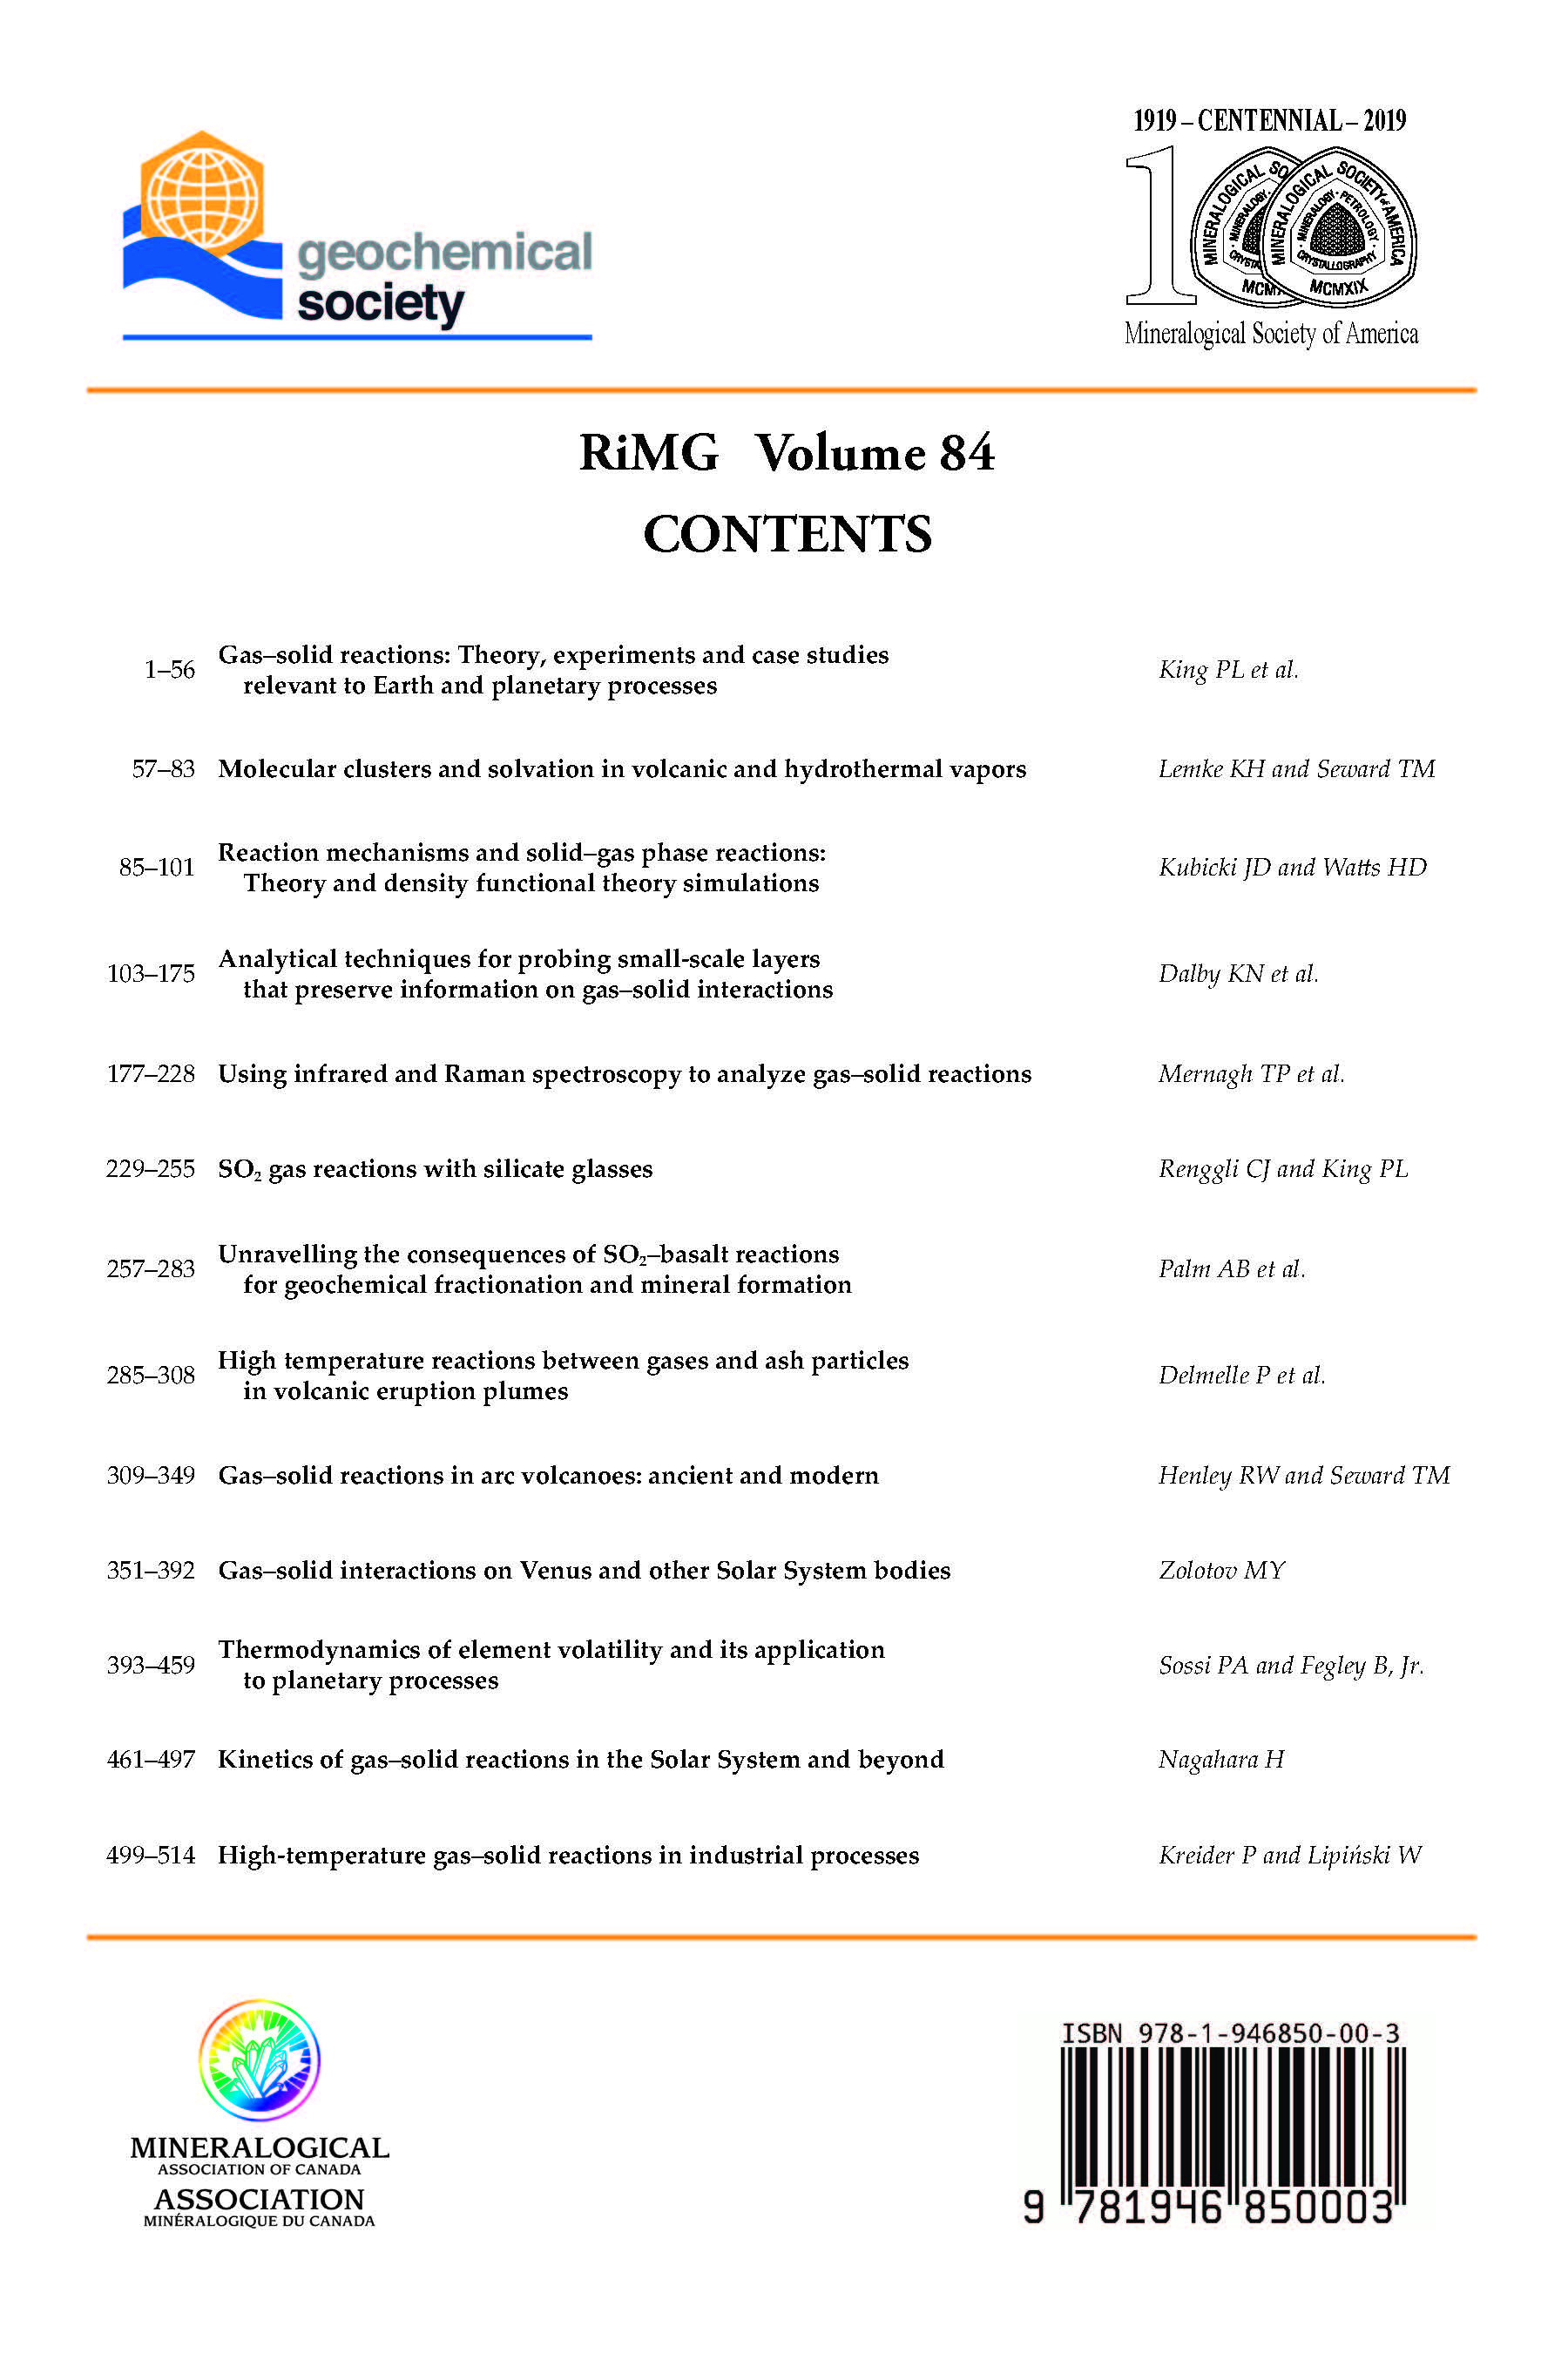 Back Cover of Reviews in Mineralogy and Geochmistry vol 84